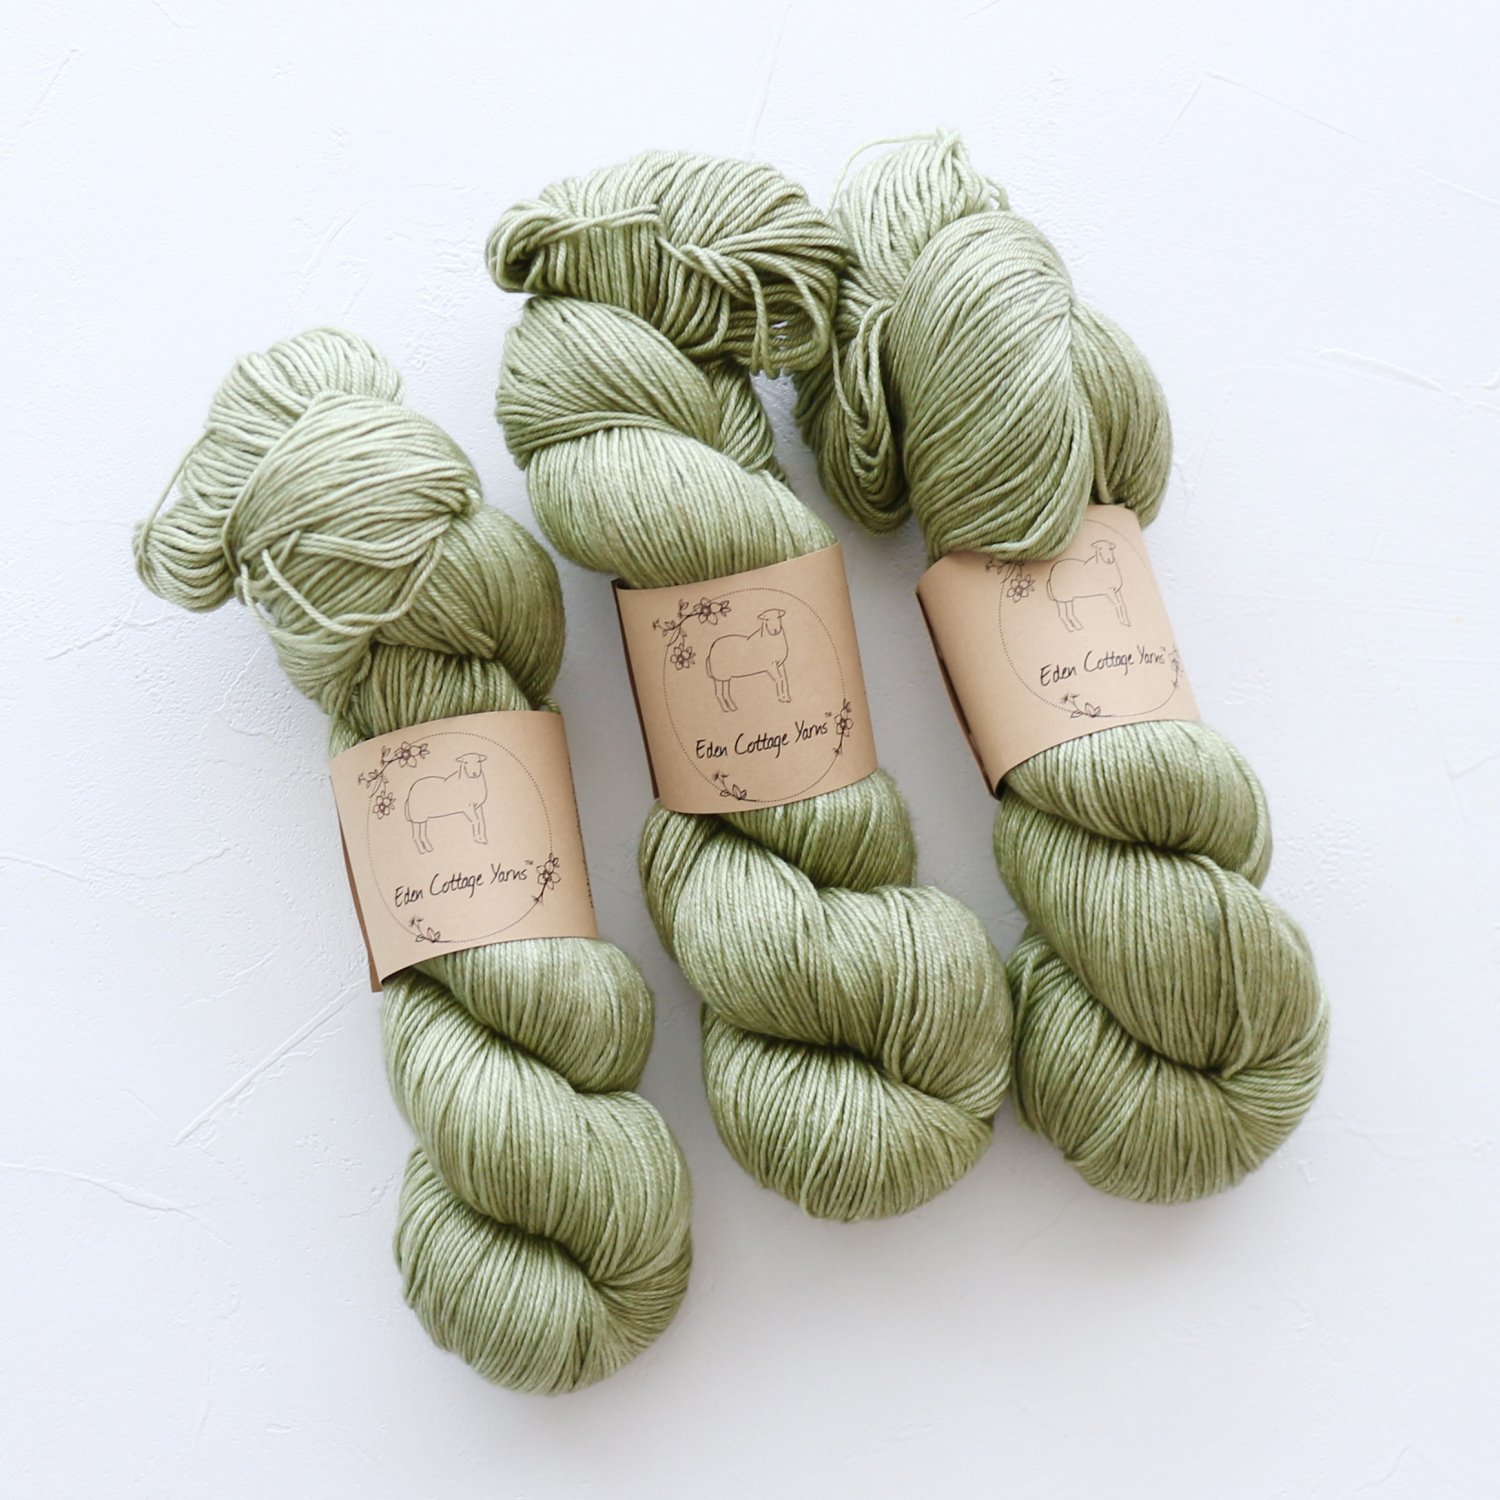 【Eden Cottage Yarns】<br>Titus 4ply<br>Waxed Jacket